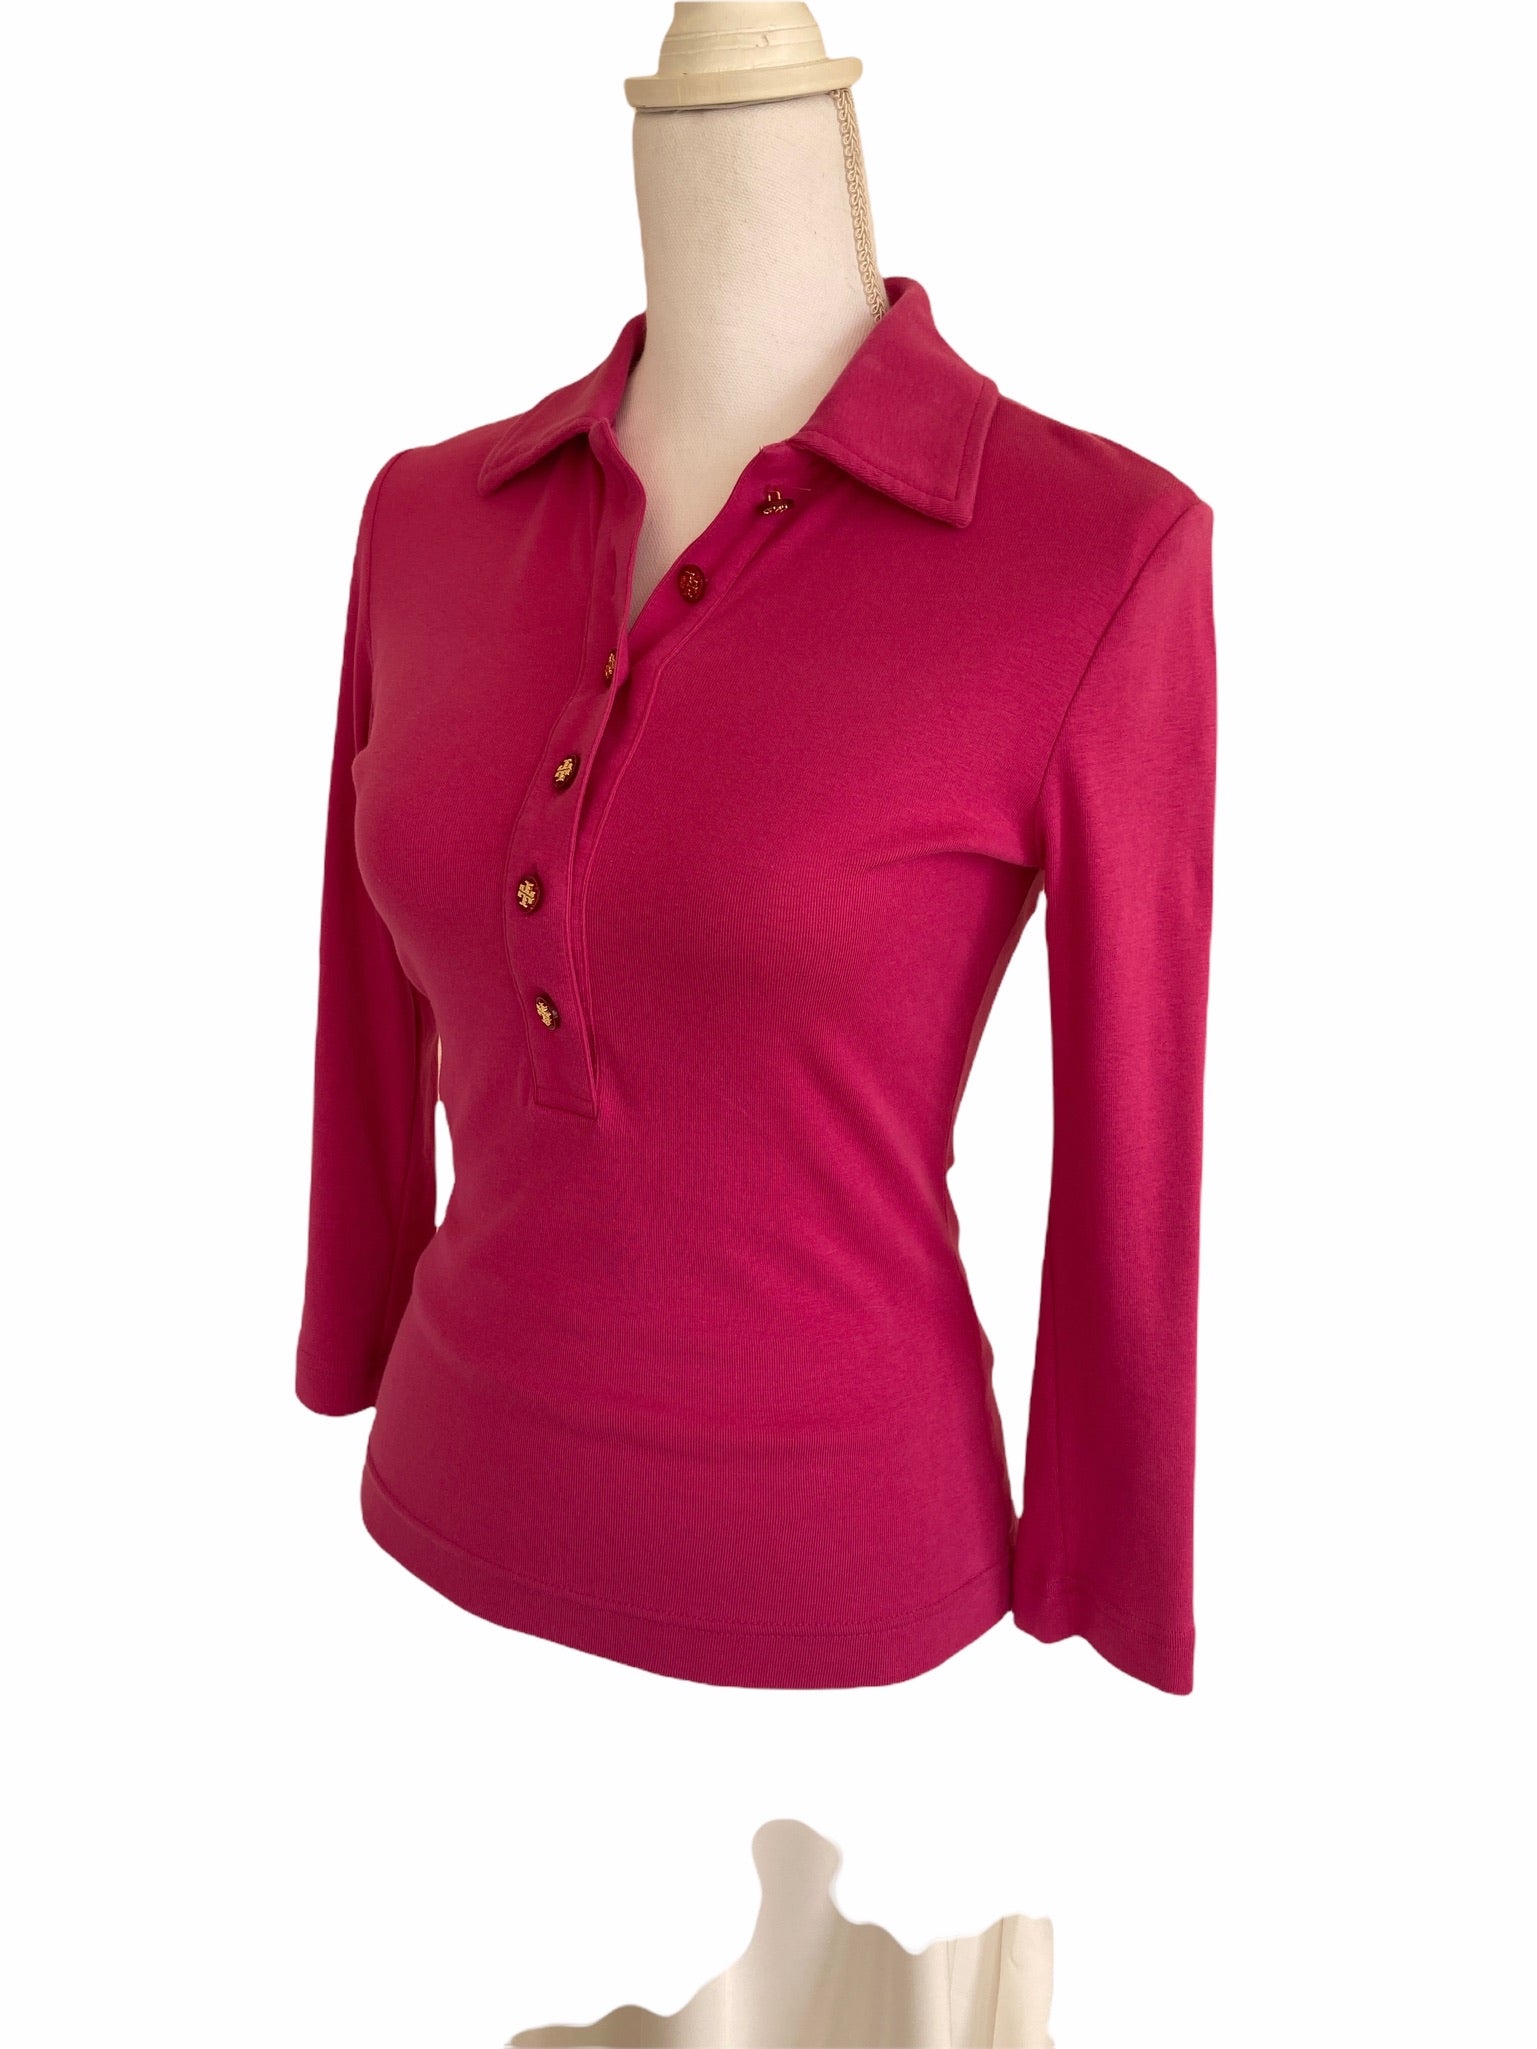 Tory Burch Pink Polo, S